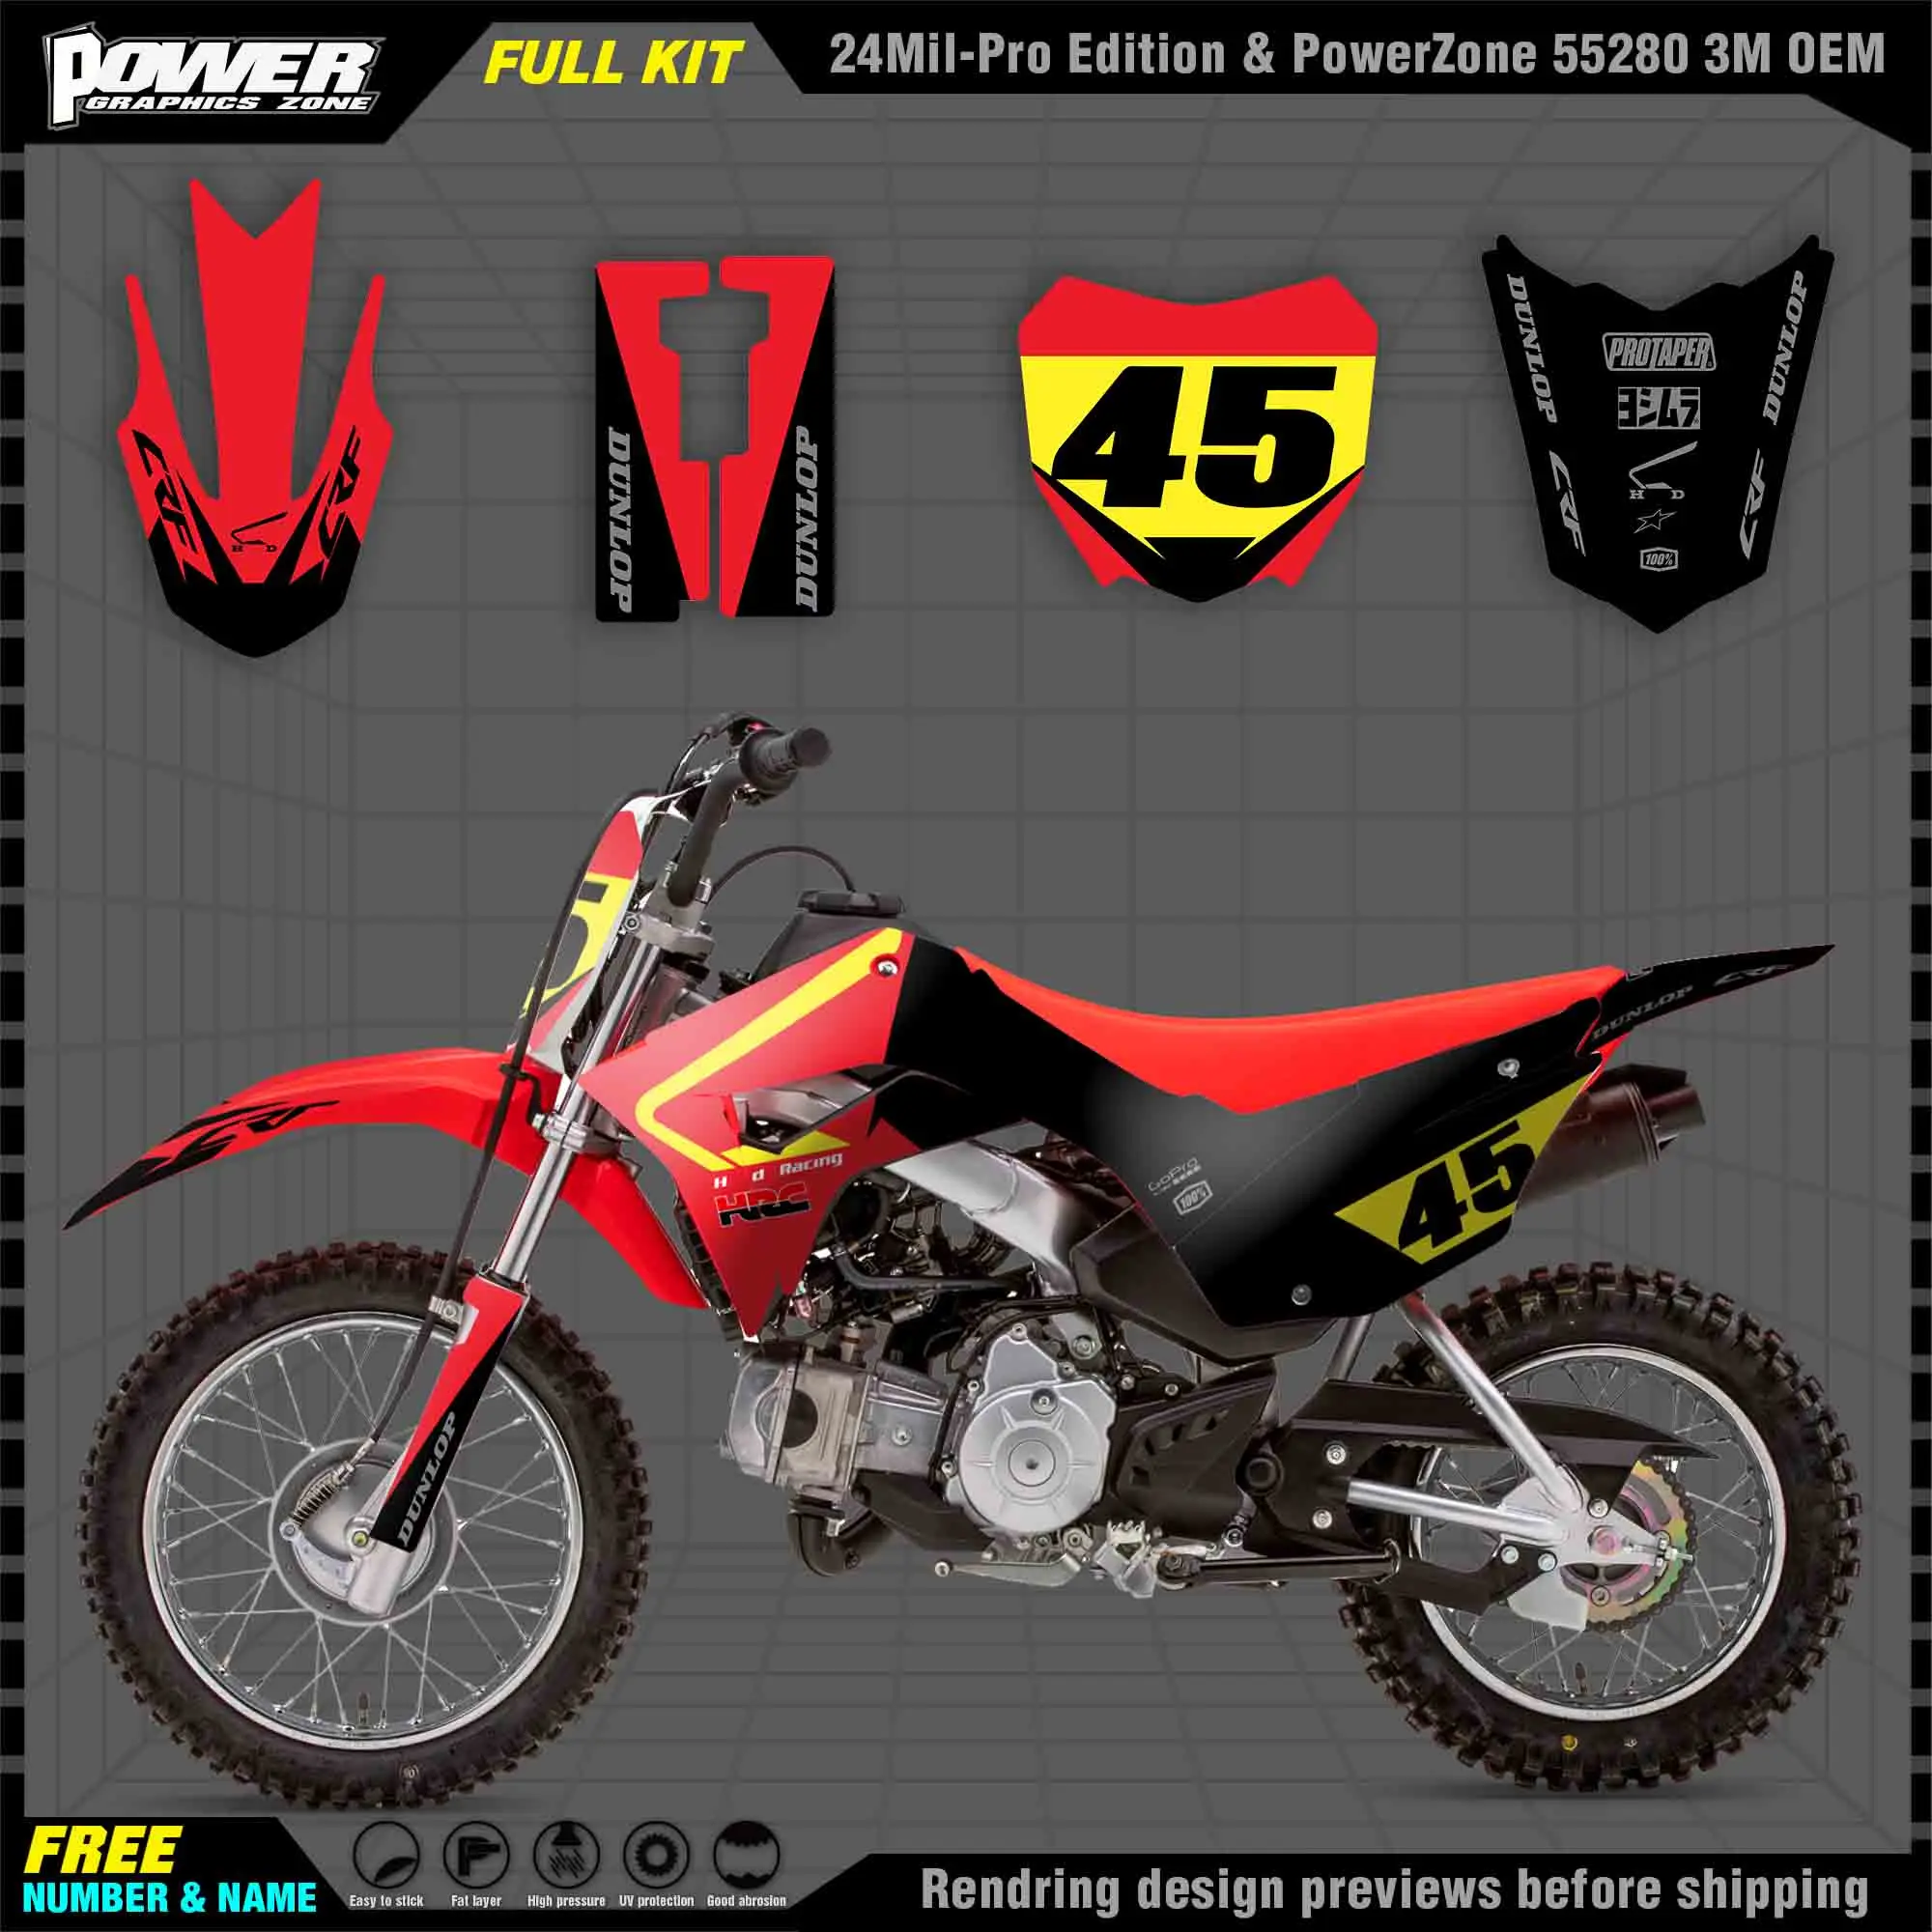 

PowerZone Custom Team Graphics Backgrounds Decals 3M Stickers Kit For Honda CRF 110F 2019-2021 007